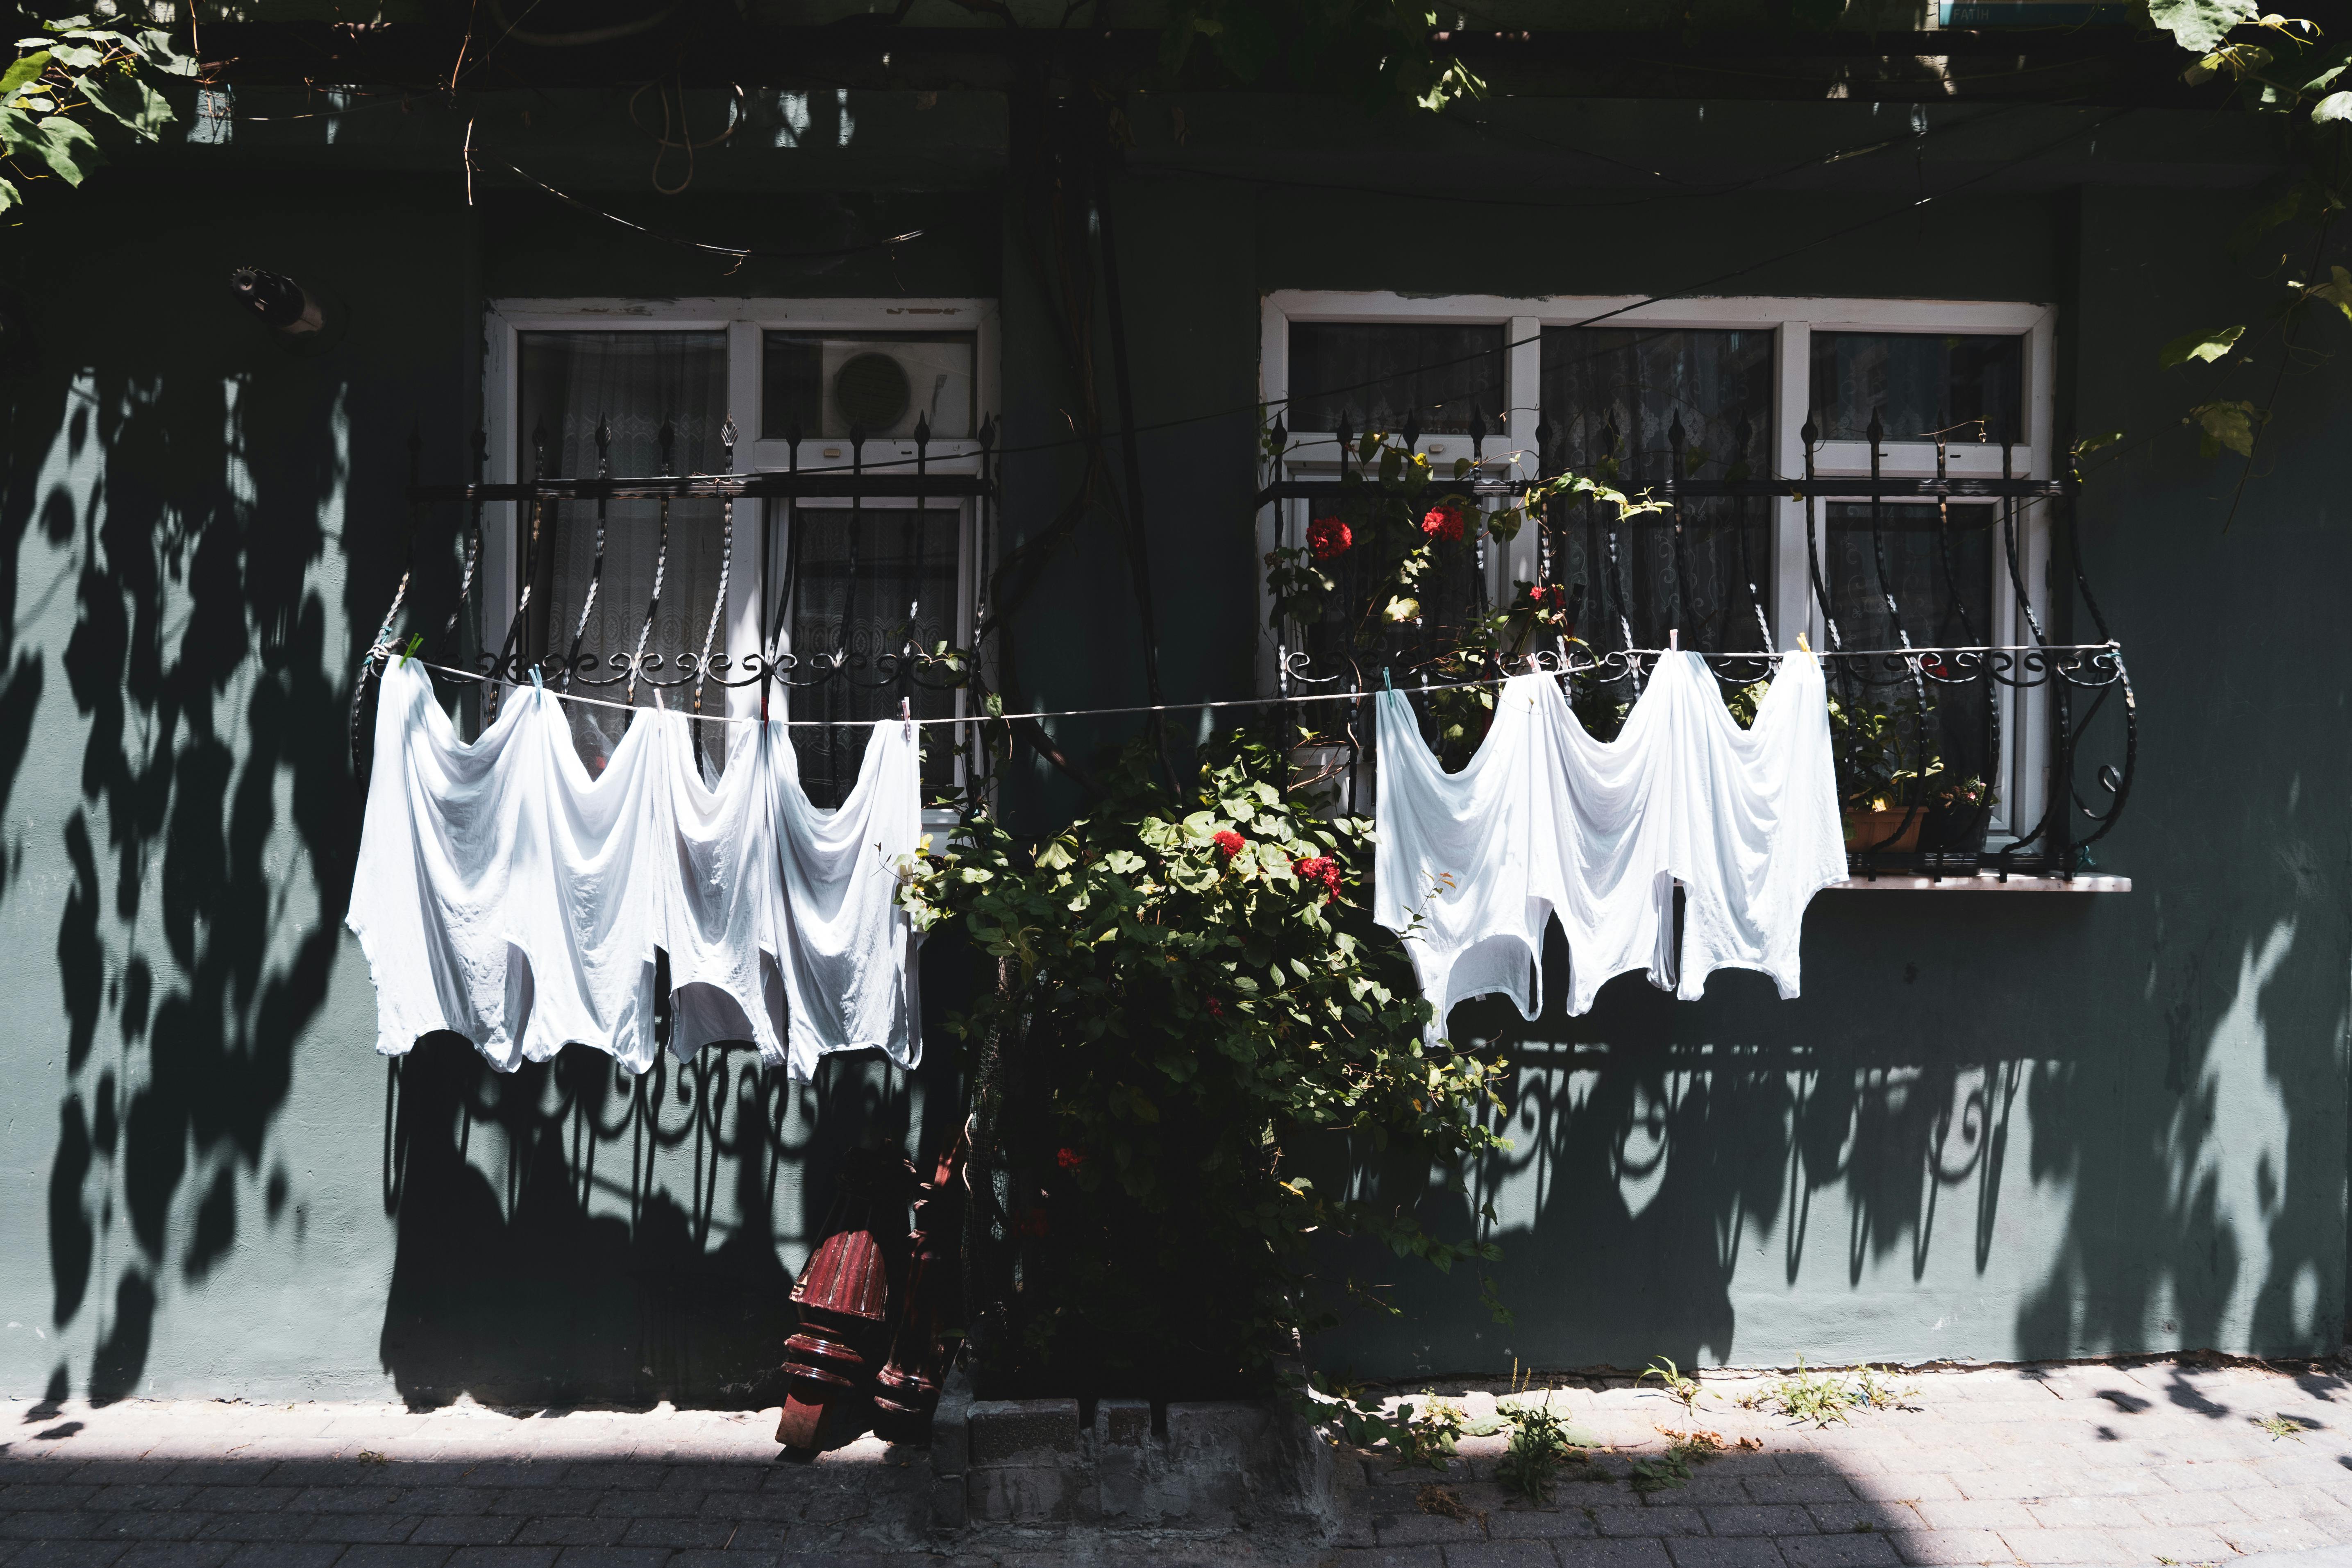 Clothes Hanging on Clotheslines outside Houses · Free Stock Photo